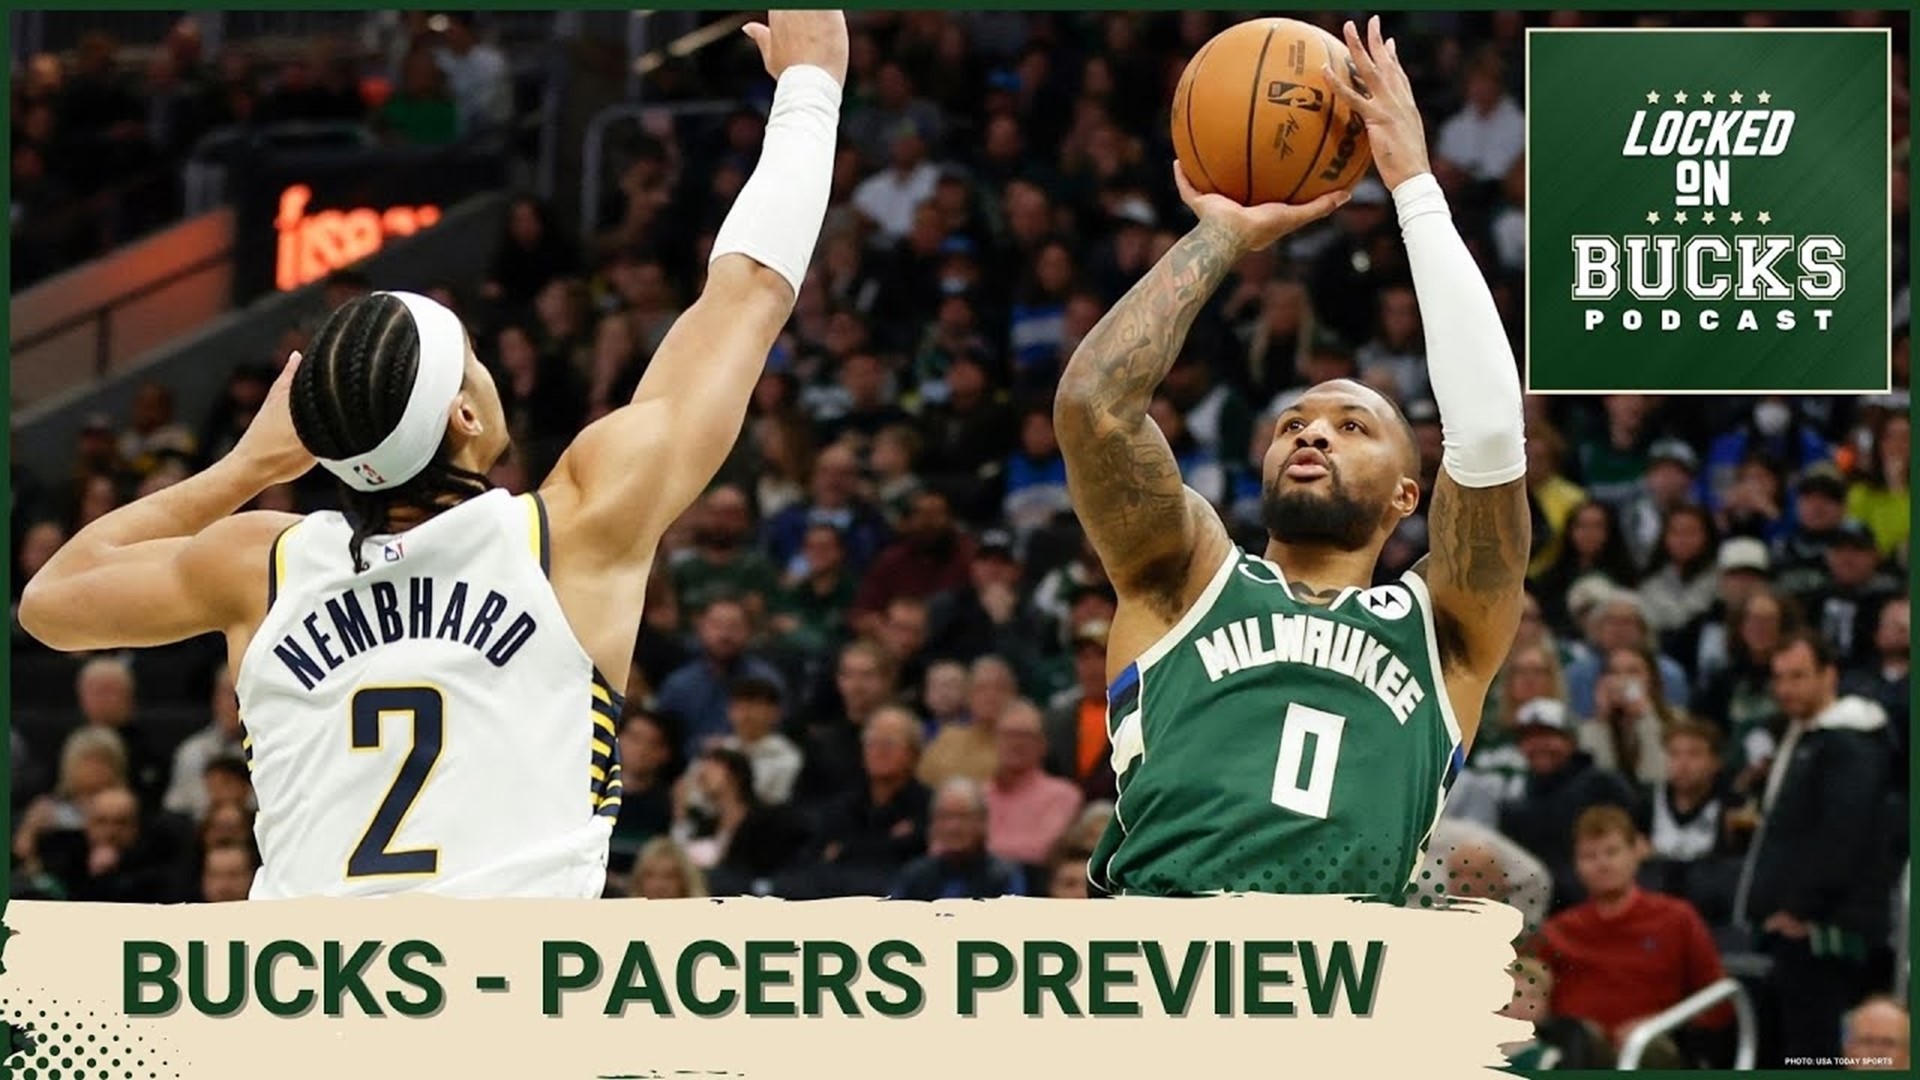 Locked on Pacers host Tony East joins Camille Davis on the show to discuss the upcoming first round playoff matchup between the Milwaukee Bucks and Indiana Pacers.